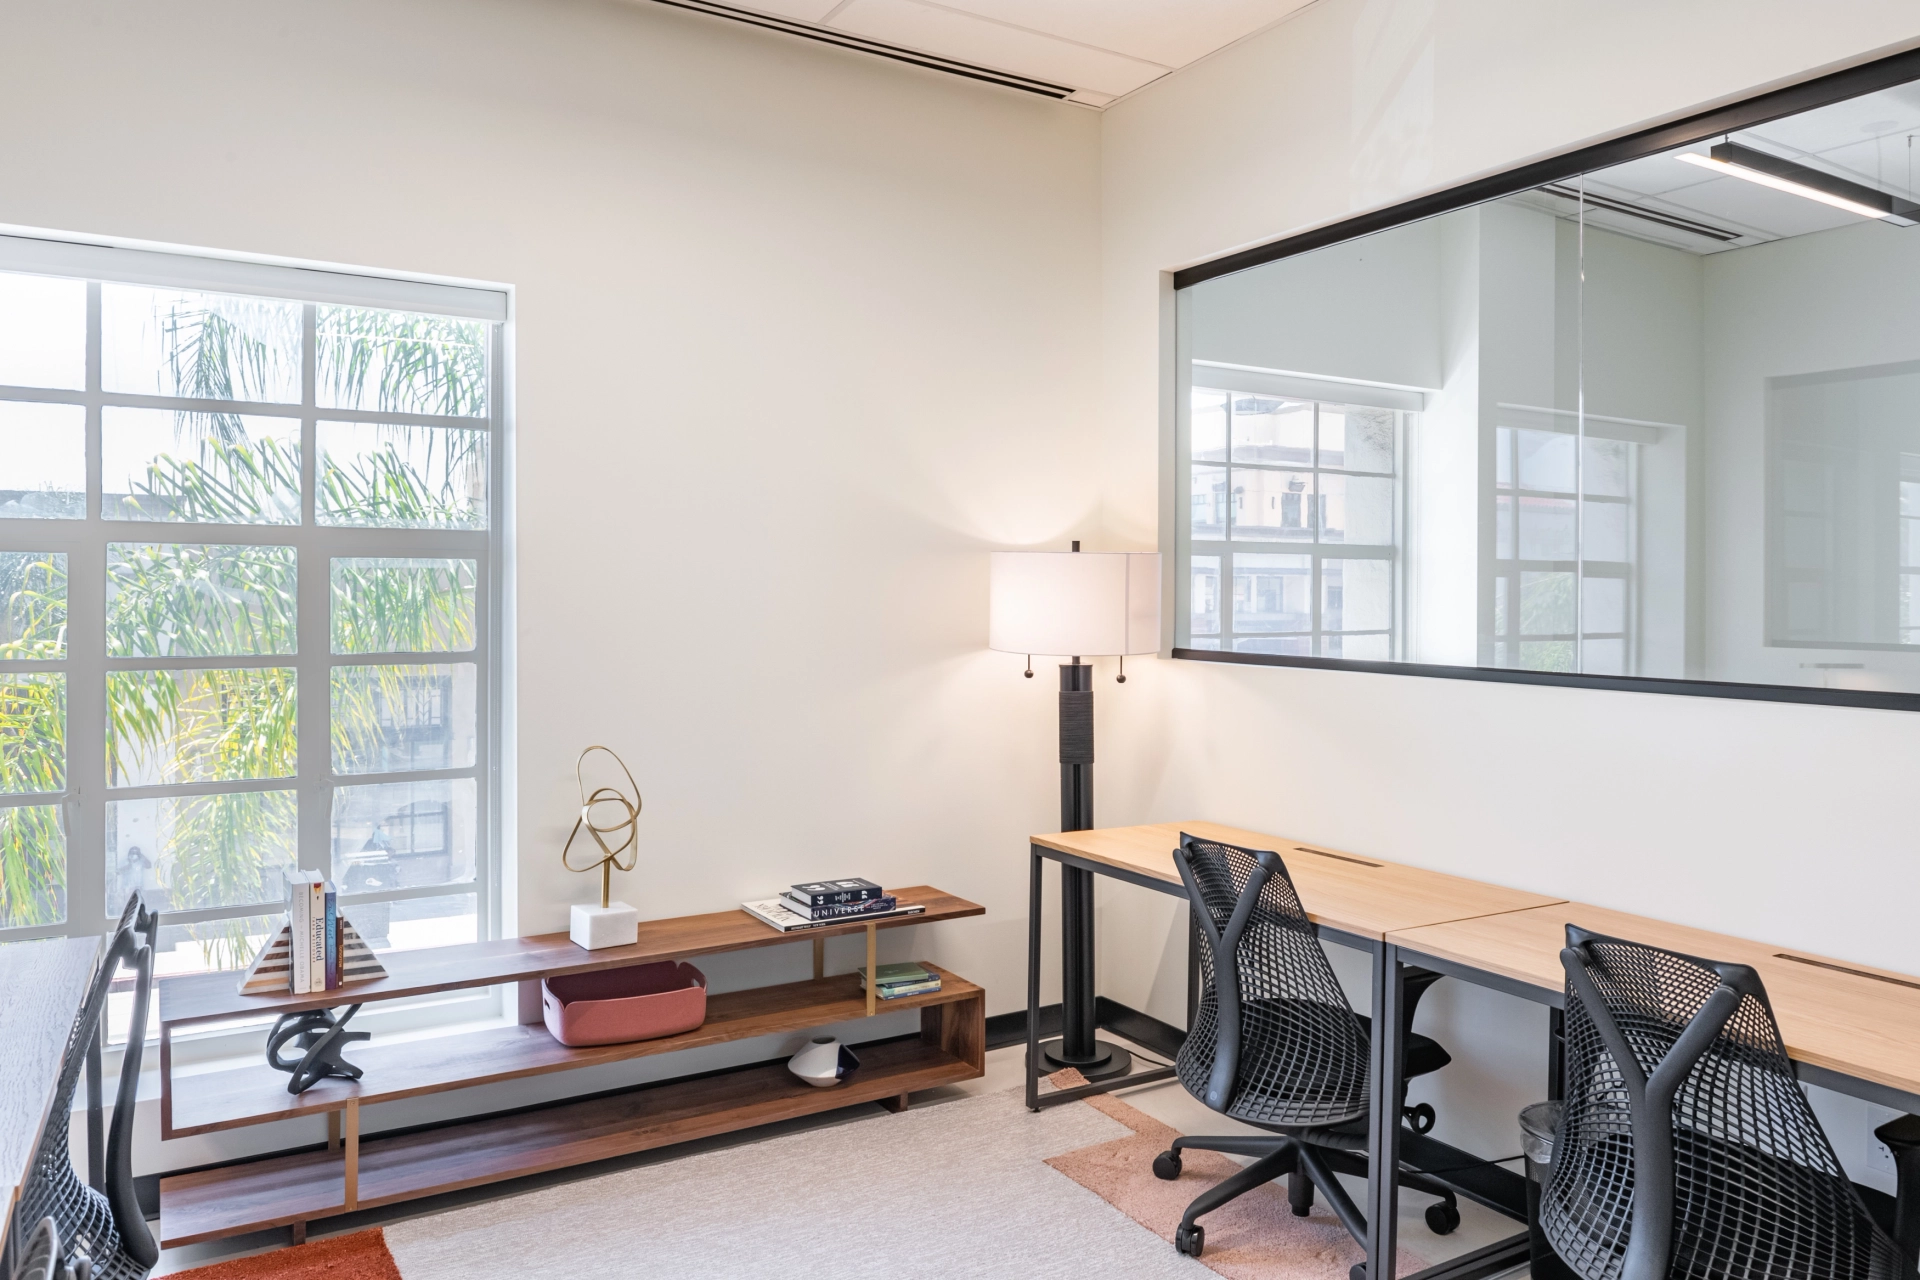 An office workspace with dual desks and a mirror.